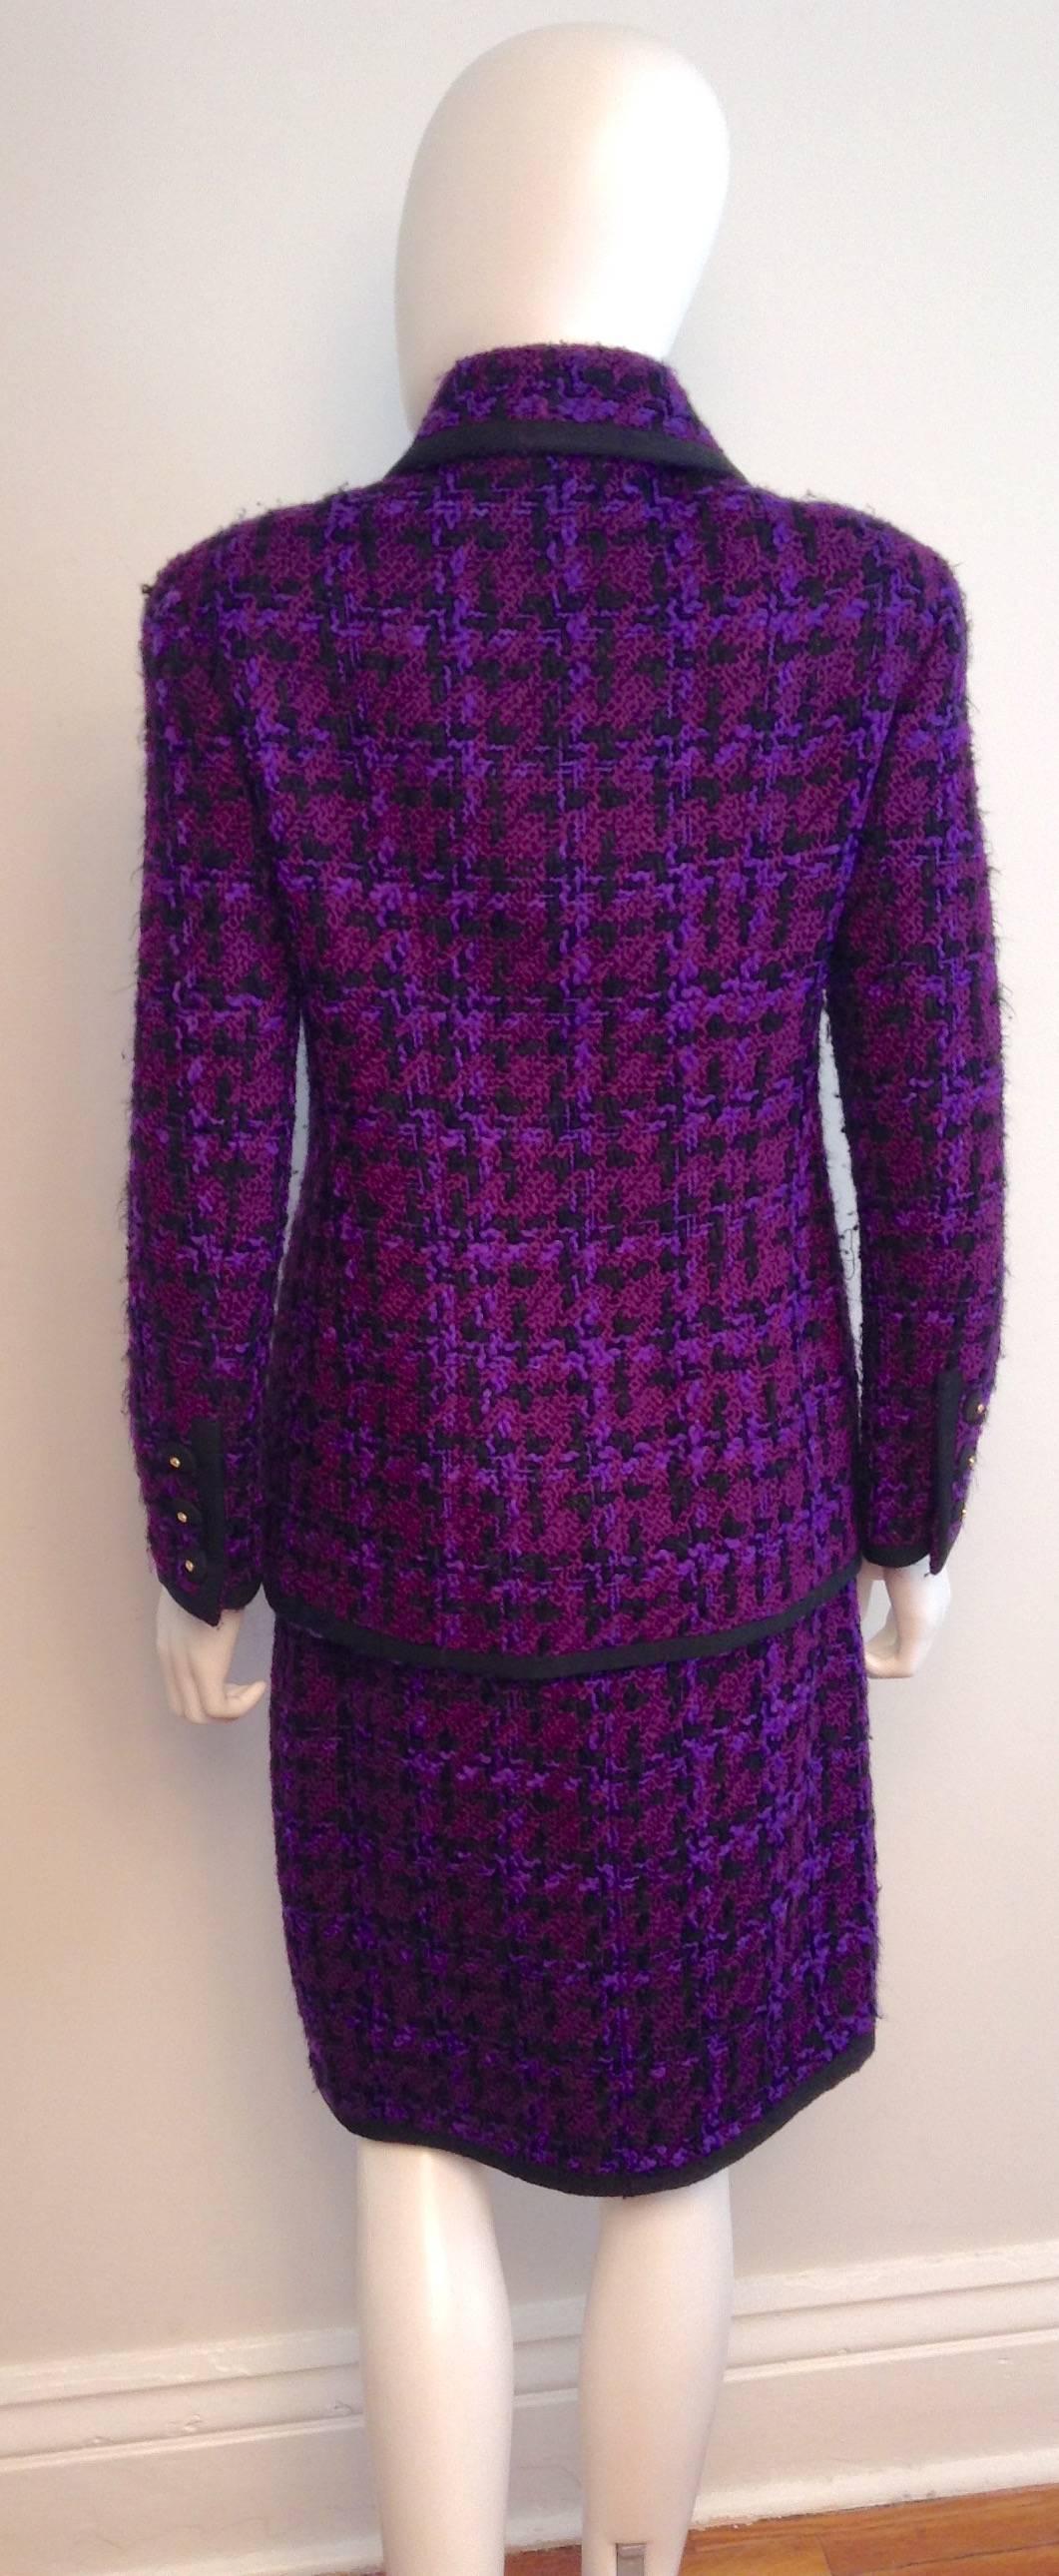 Multi-shades of purple are showcased in this cool Chanel Purple Tweed Skirt Suit. The jacket features two flat front pockets, long sleeves and black trim. Black silk covered buttons with small CC gold detailing decorate the suit. Button up closure.